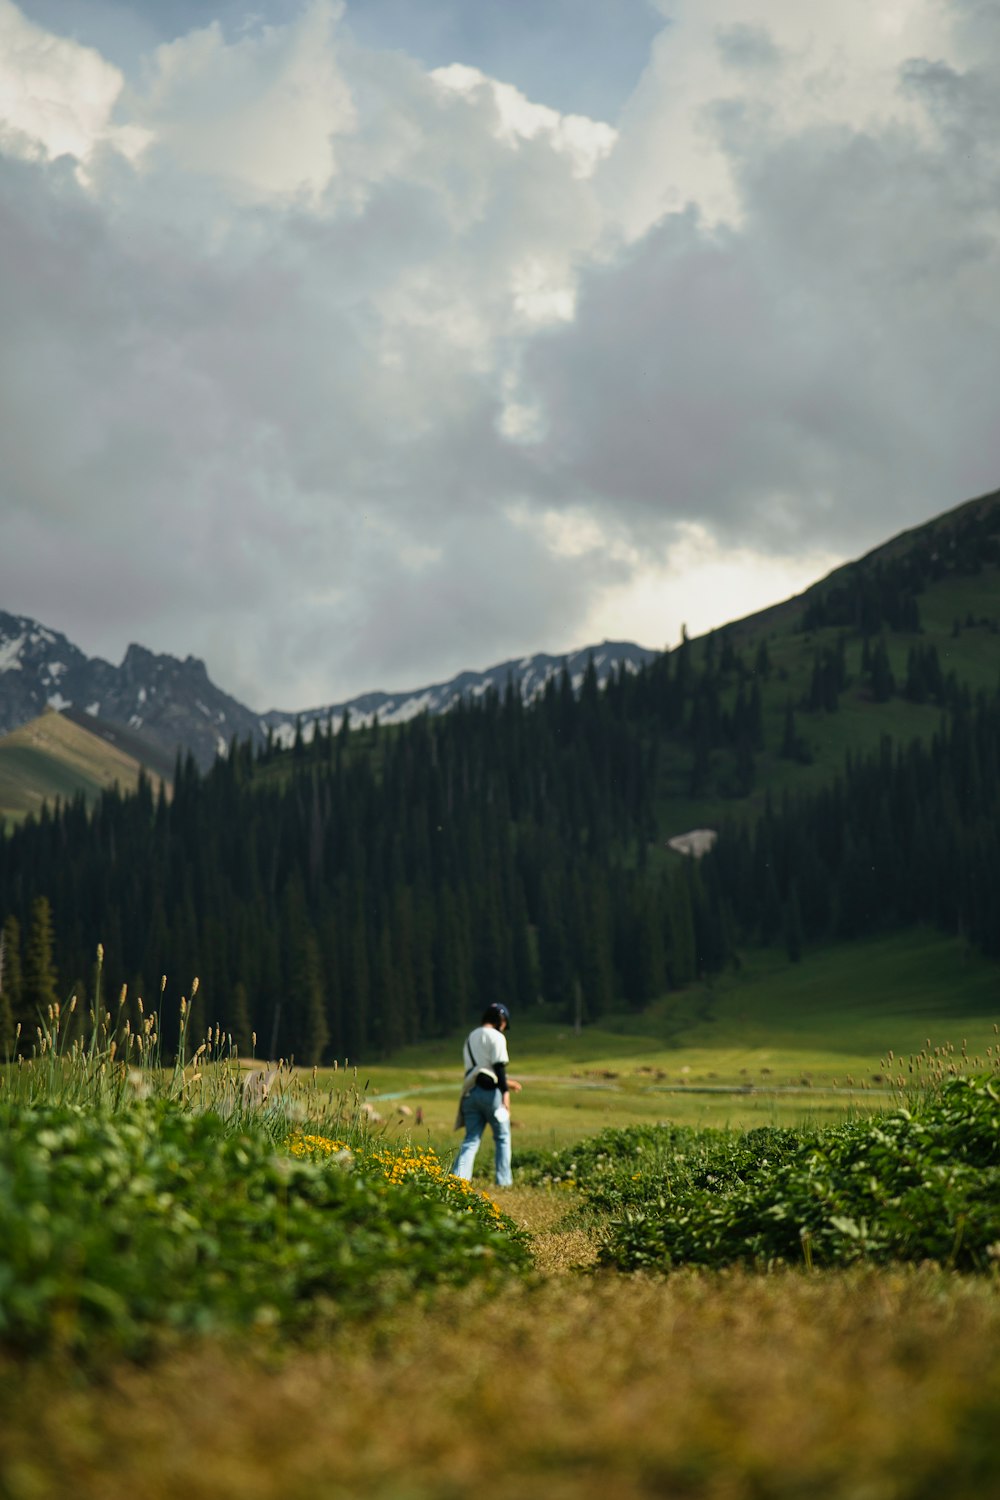 a person walking in a field with mountains in the background